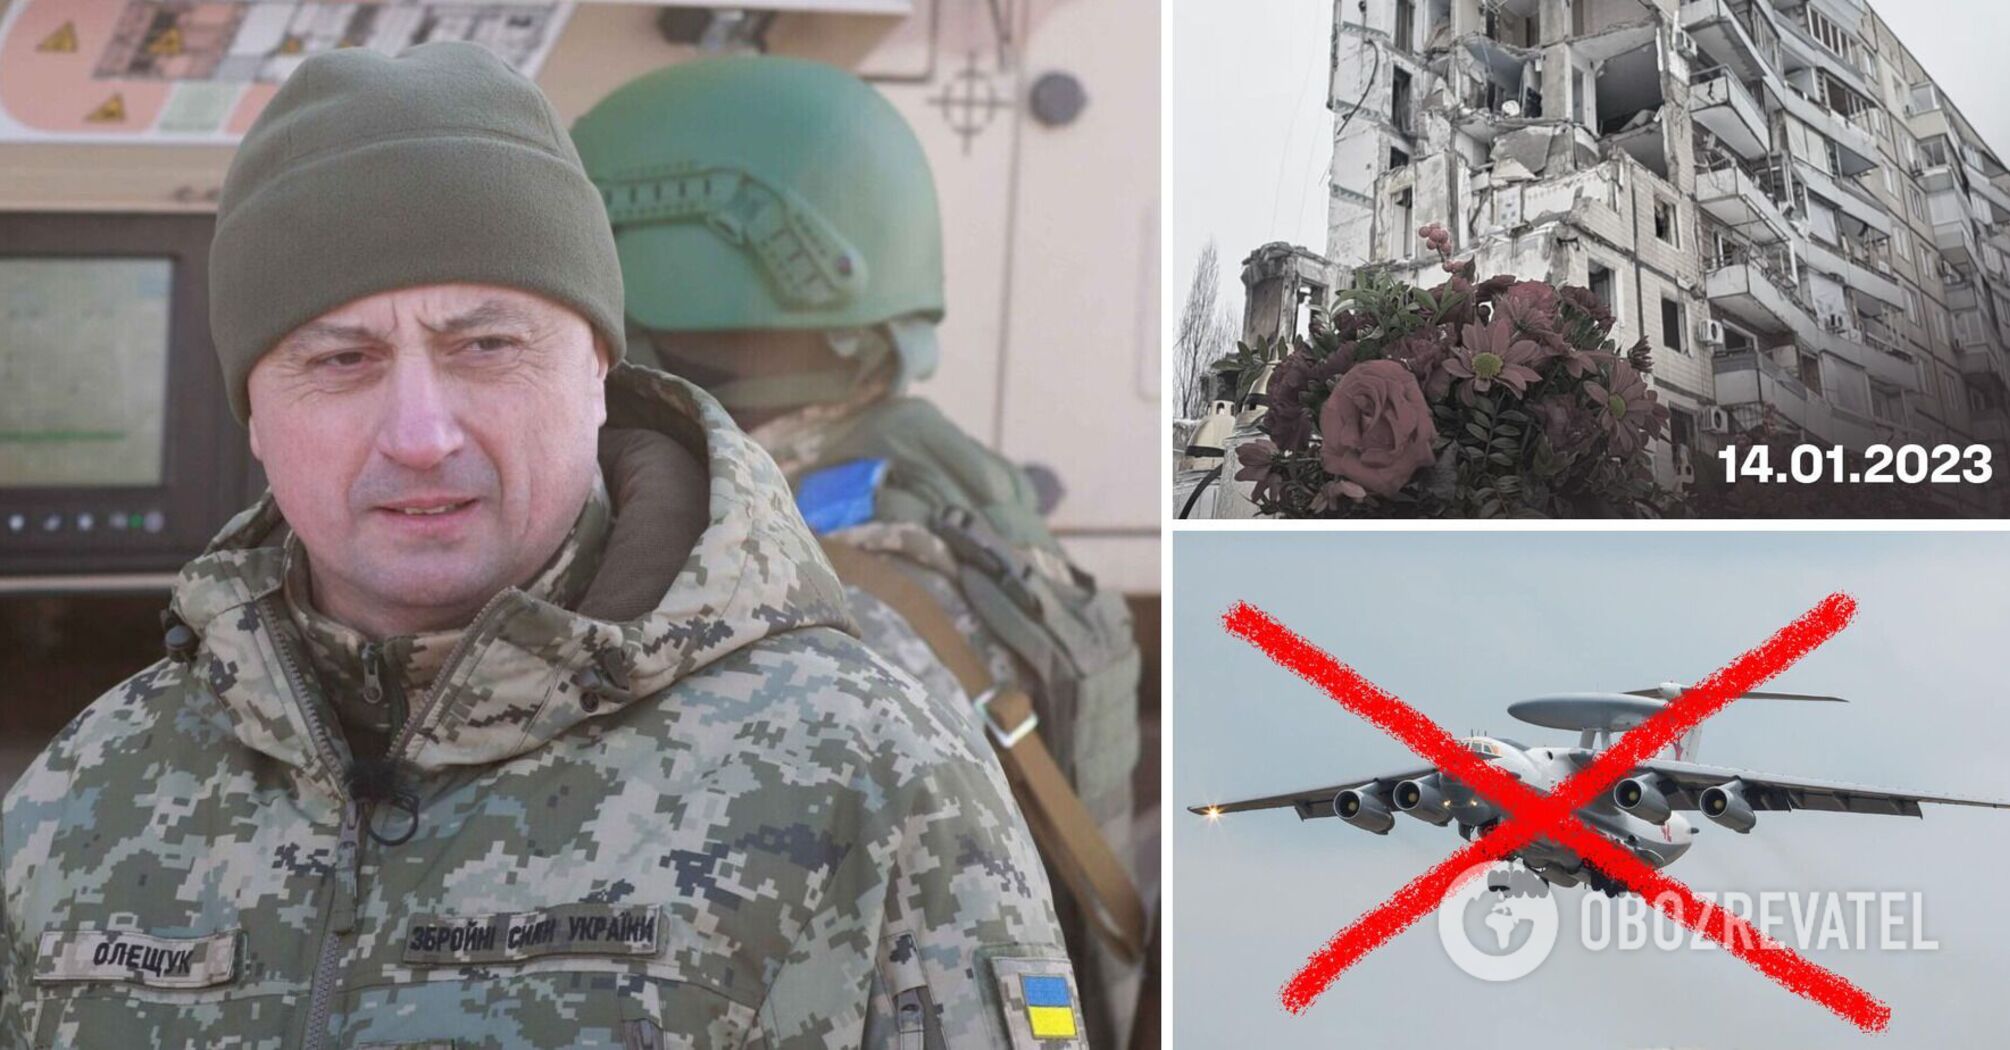 'This is for Dnipro': Ukraine's Air Force hints at the culprit responsible for two Russian aircraft downing over the Sea of Azov